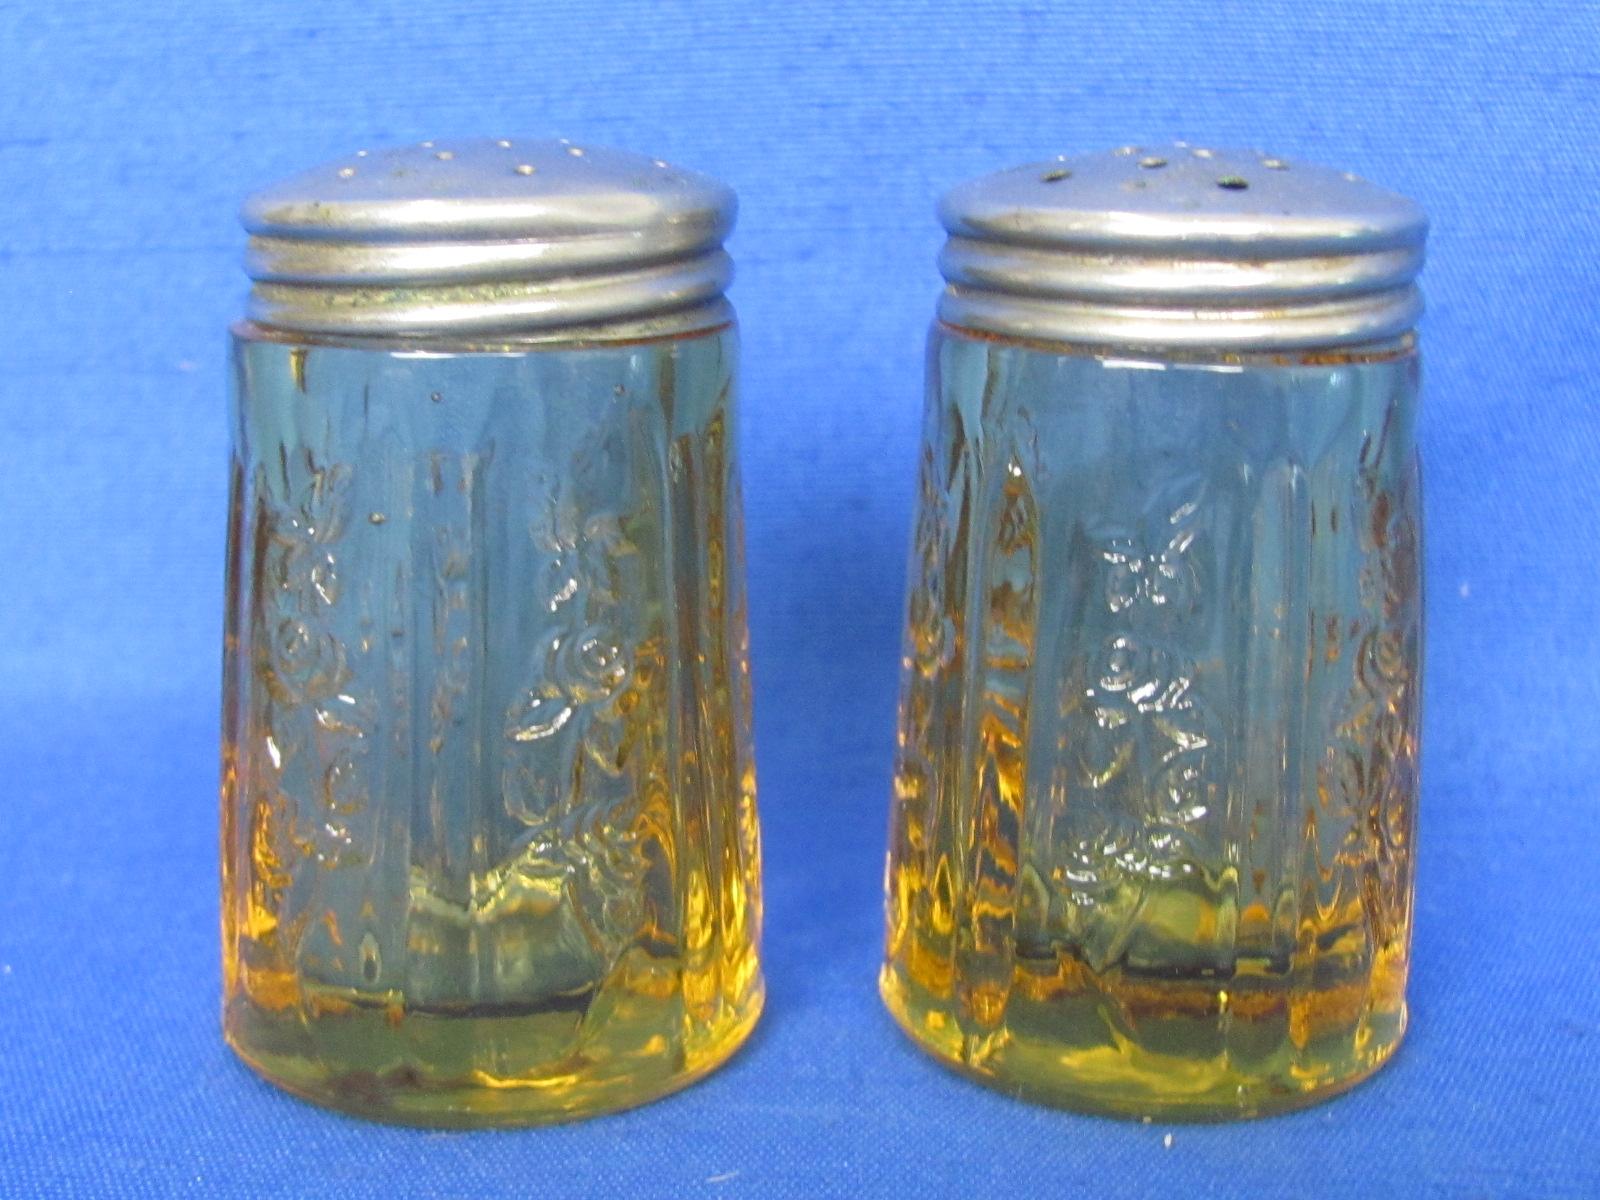 Shakers: Blue Moon & Stars Sugar by Smith, Amber Sharon by Federal Glass, Etched Pair